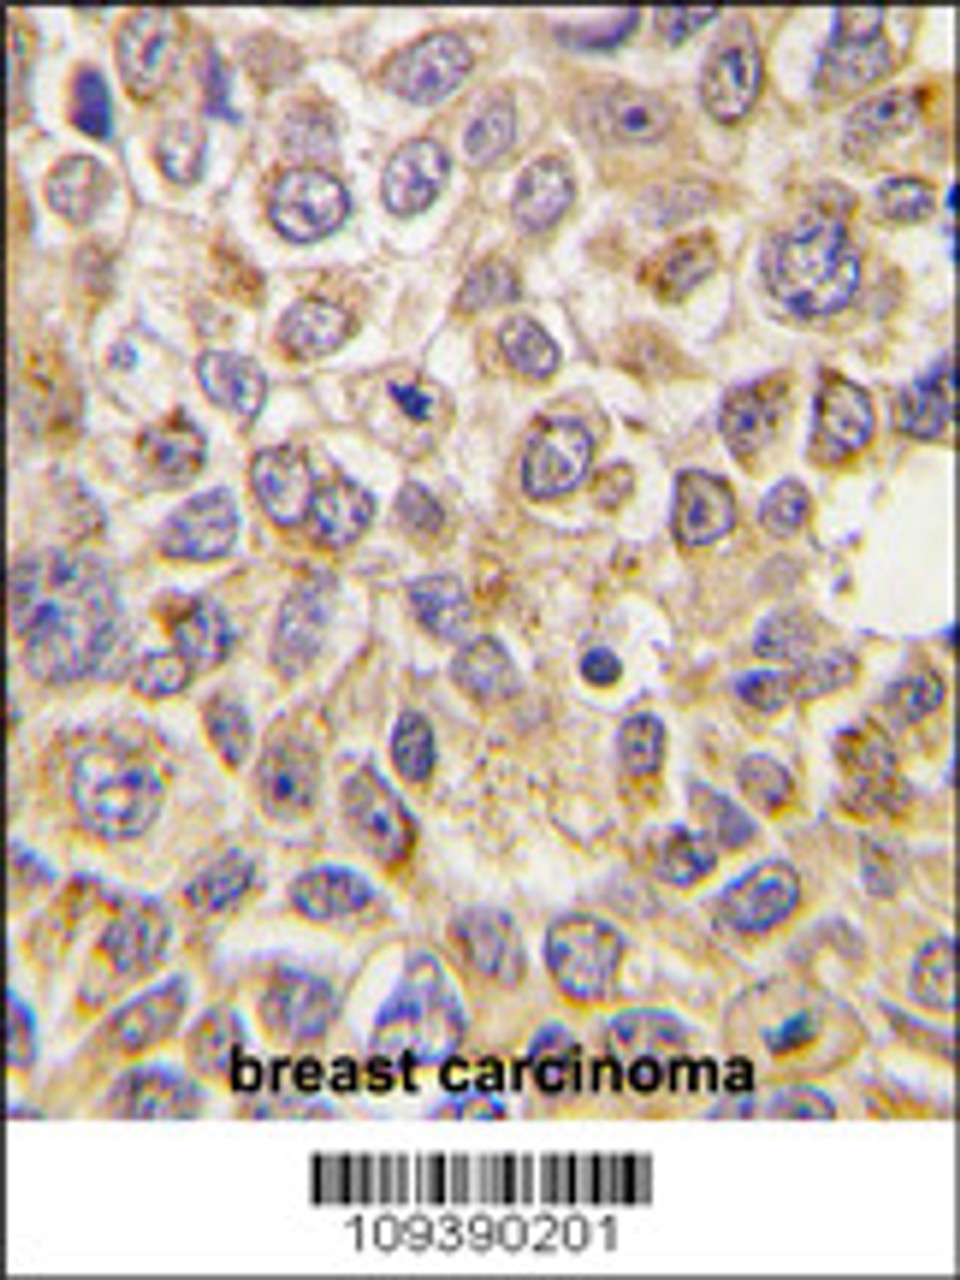 Formalin-fixed and paraffin-embedded human breast carcinoma tissue reacted with PMAT (Slc29a4) Antibody, which was peroxidase-conjugated to the secondary antibody, followed by DAB staining.